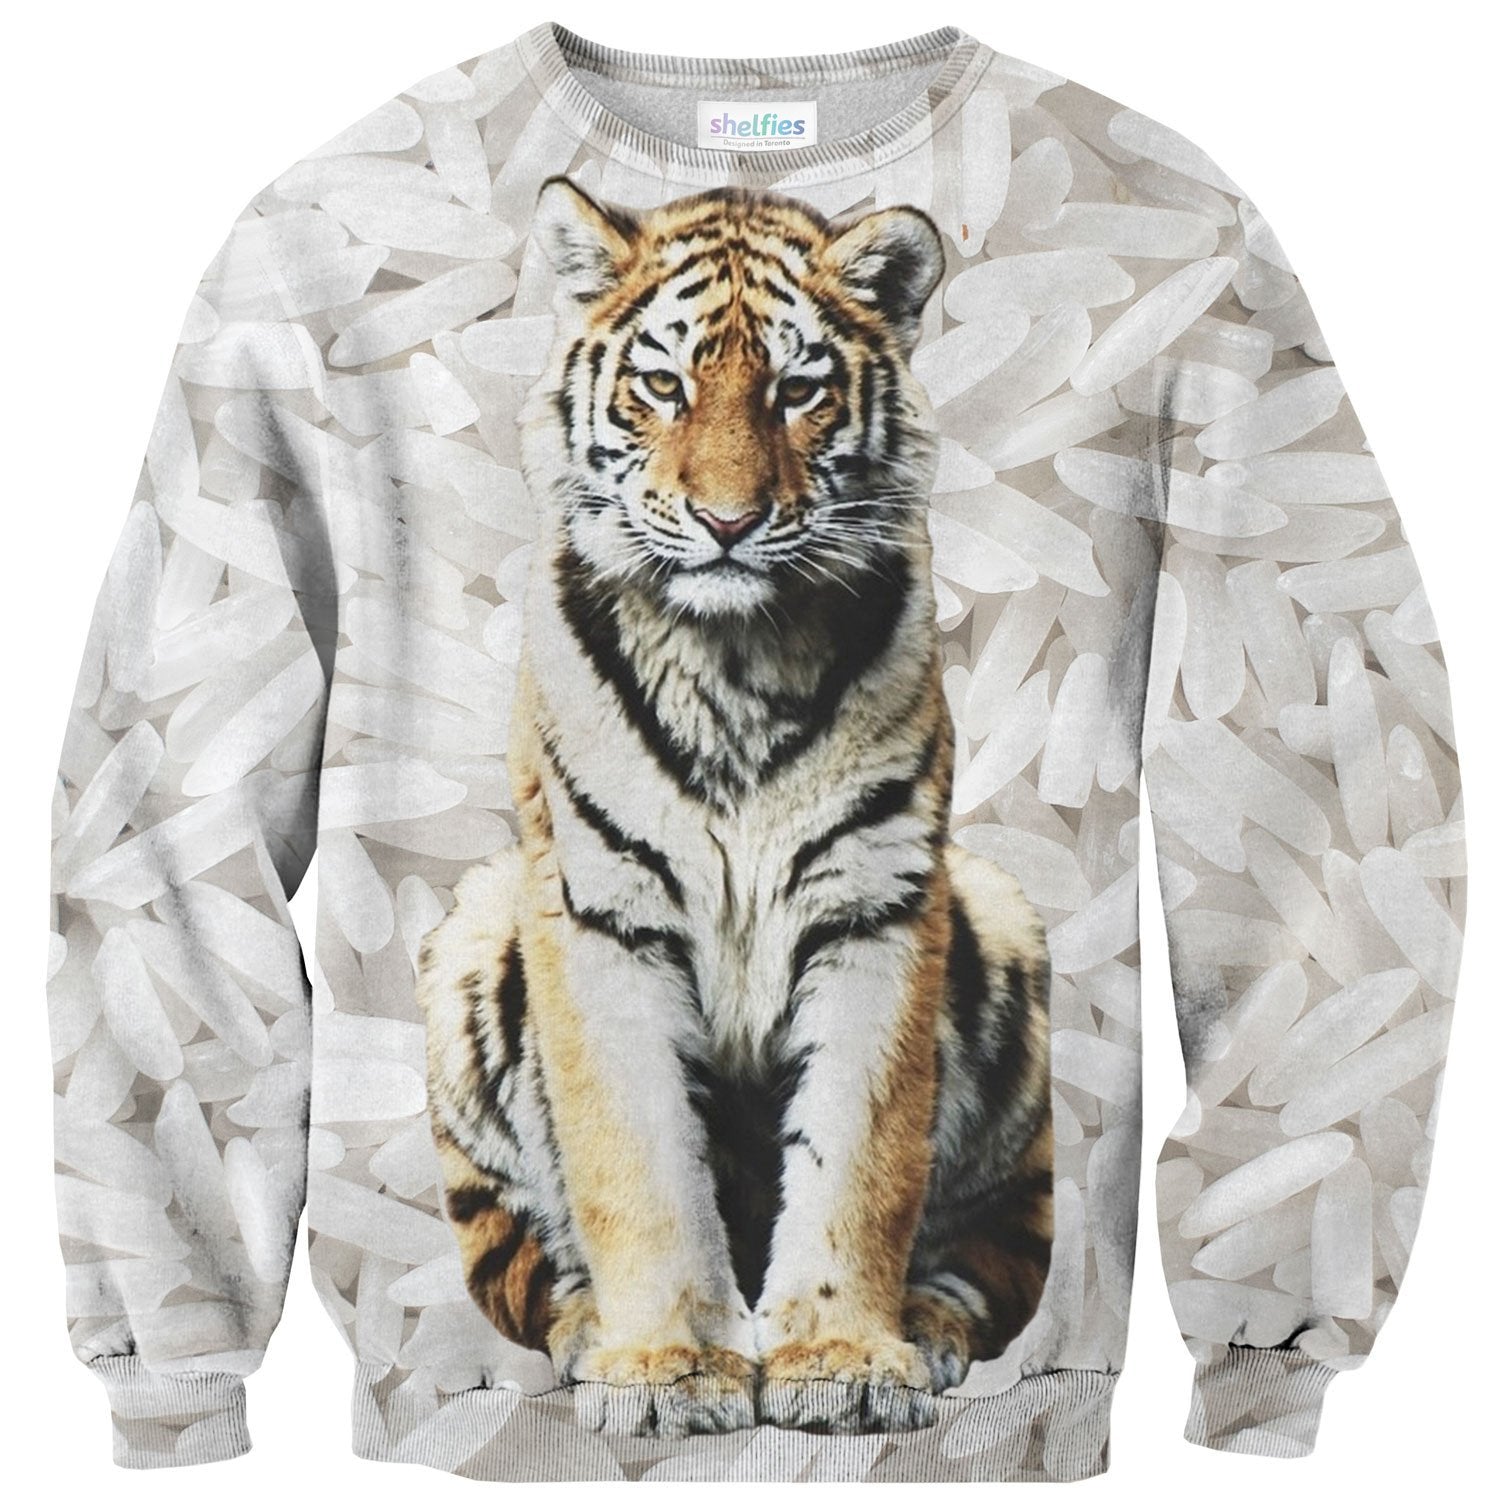 GORGEOUS INTARSIA TIGER Sweater by Sugarhill Size 8 100% 